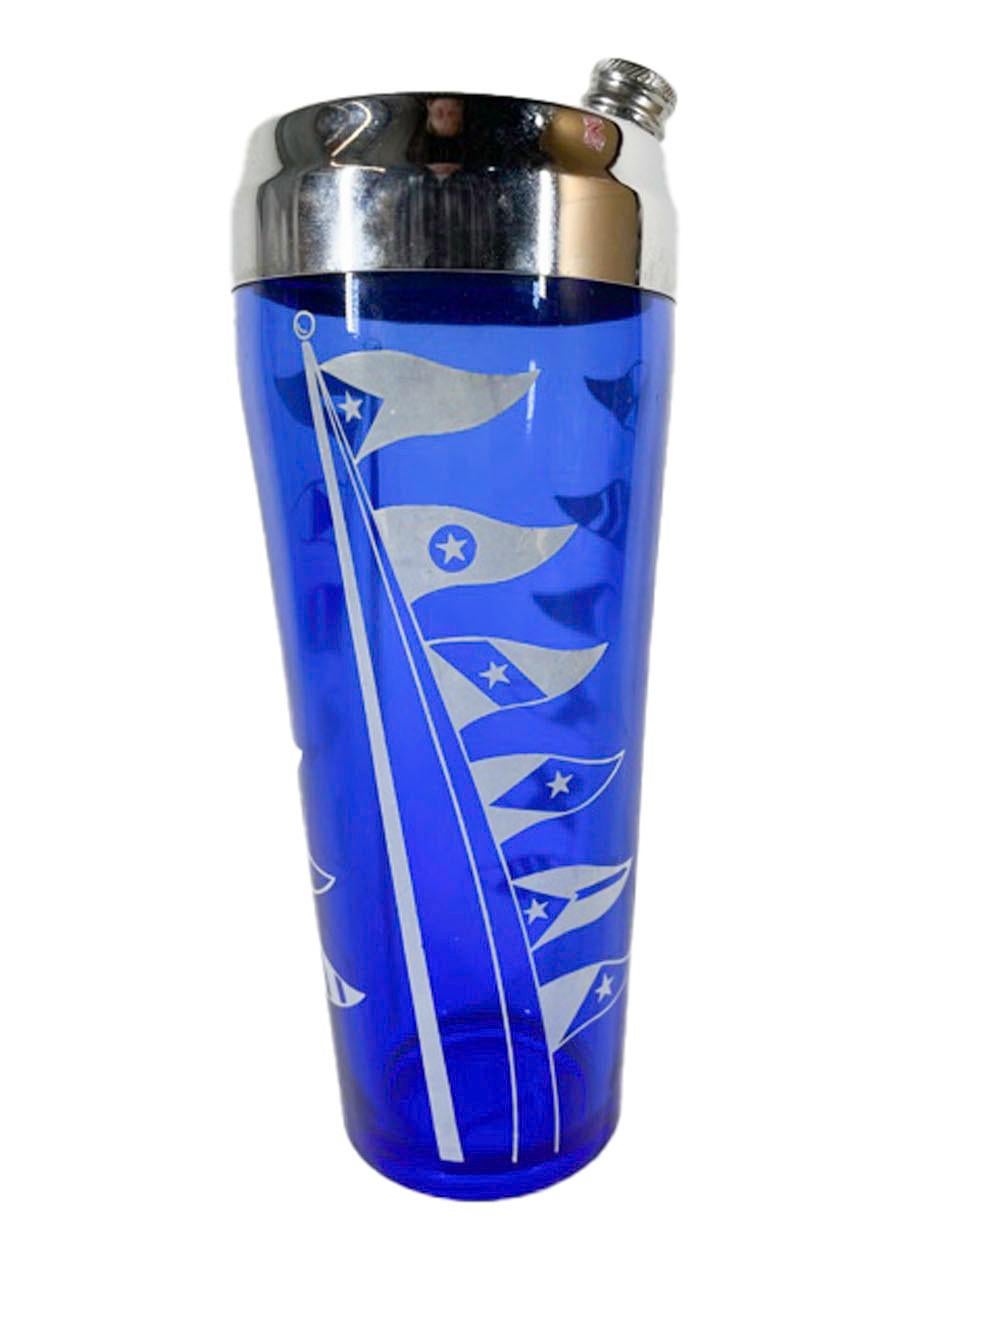 Hazel-Atlas cocktail shaker from the Sportsmans Series in cobalt glass with white nautical flags and a chrome lid.